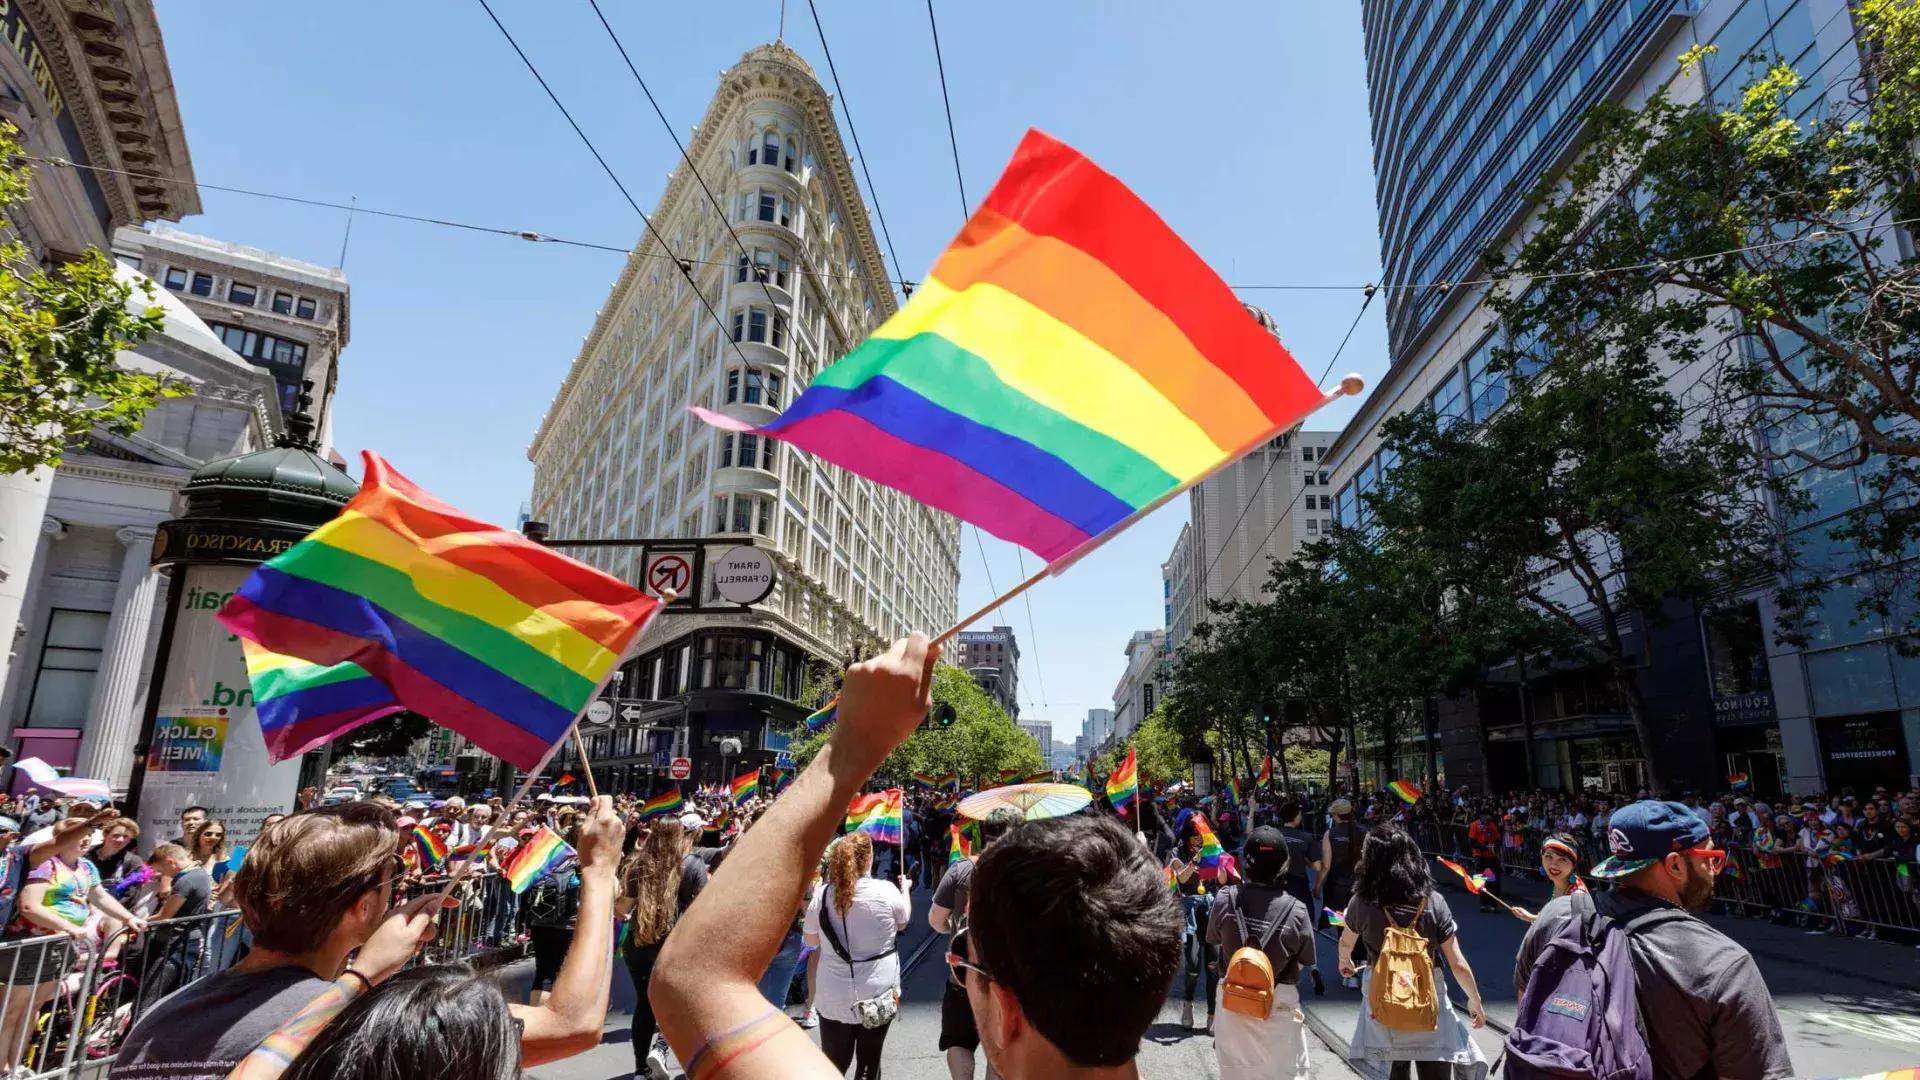 People walking in the San Francisco Pride parade wave rainbow flags.